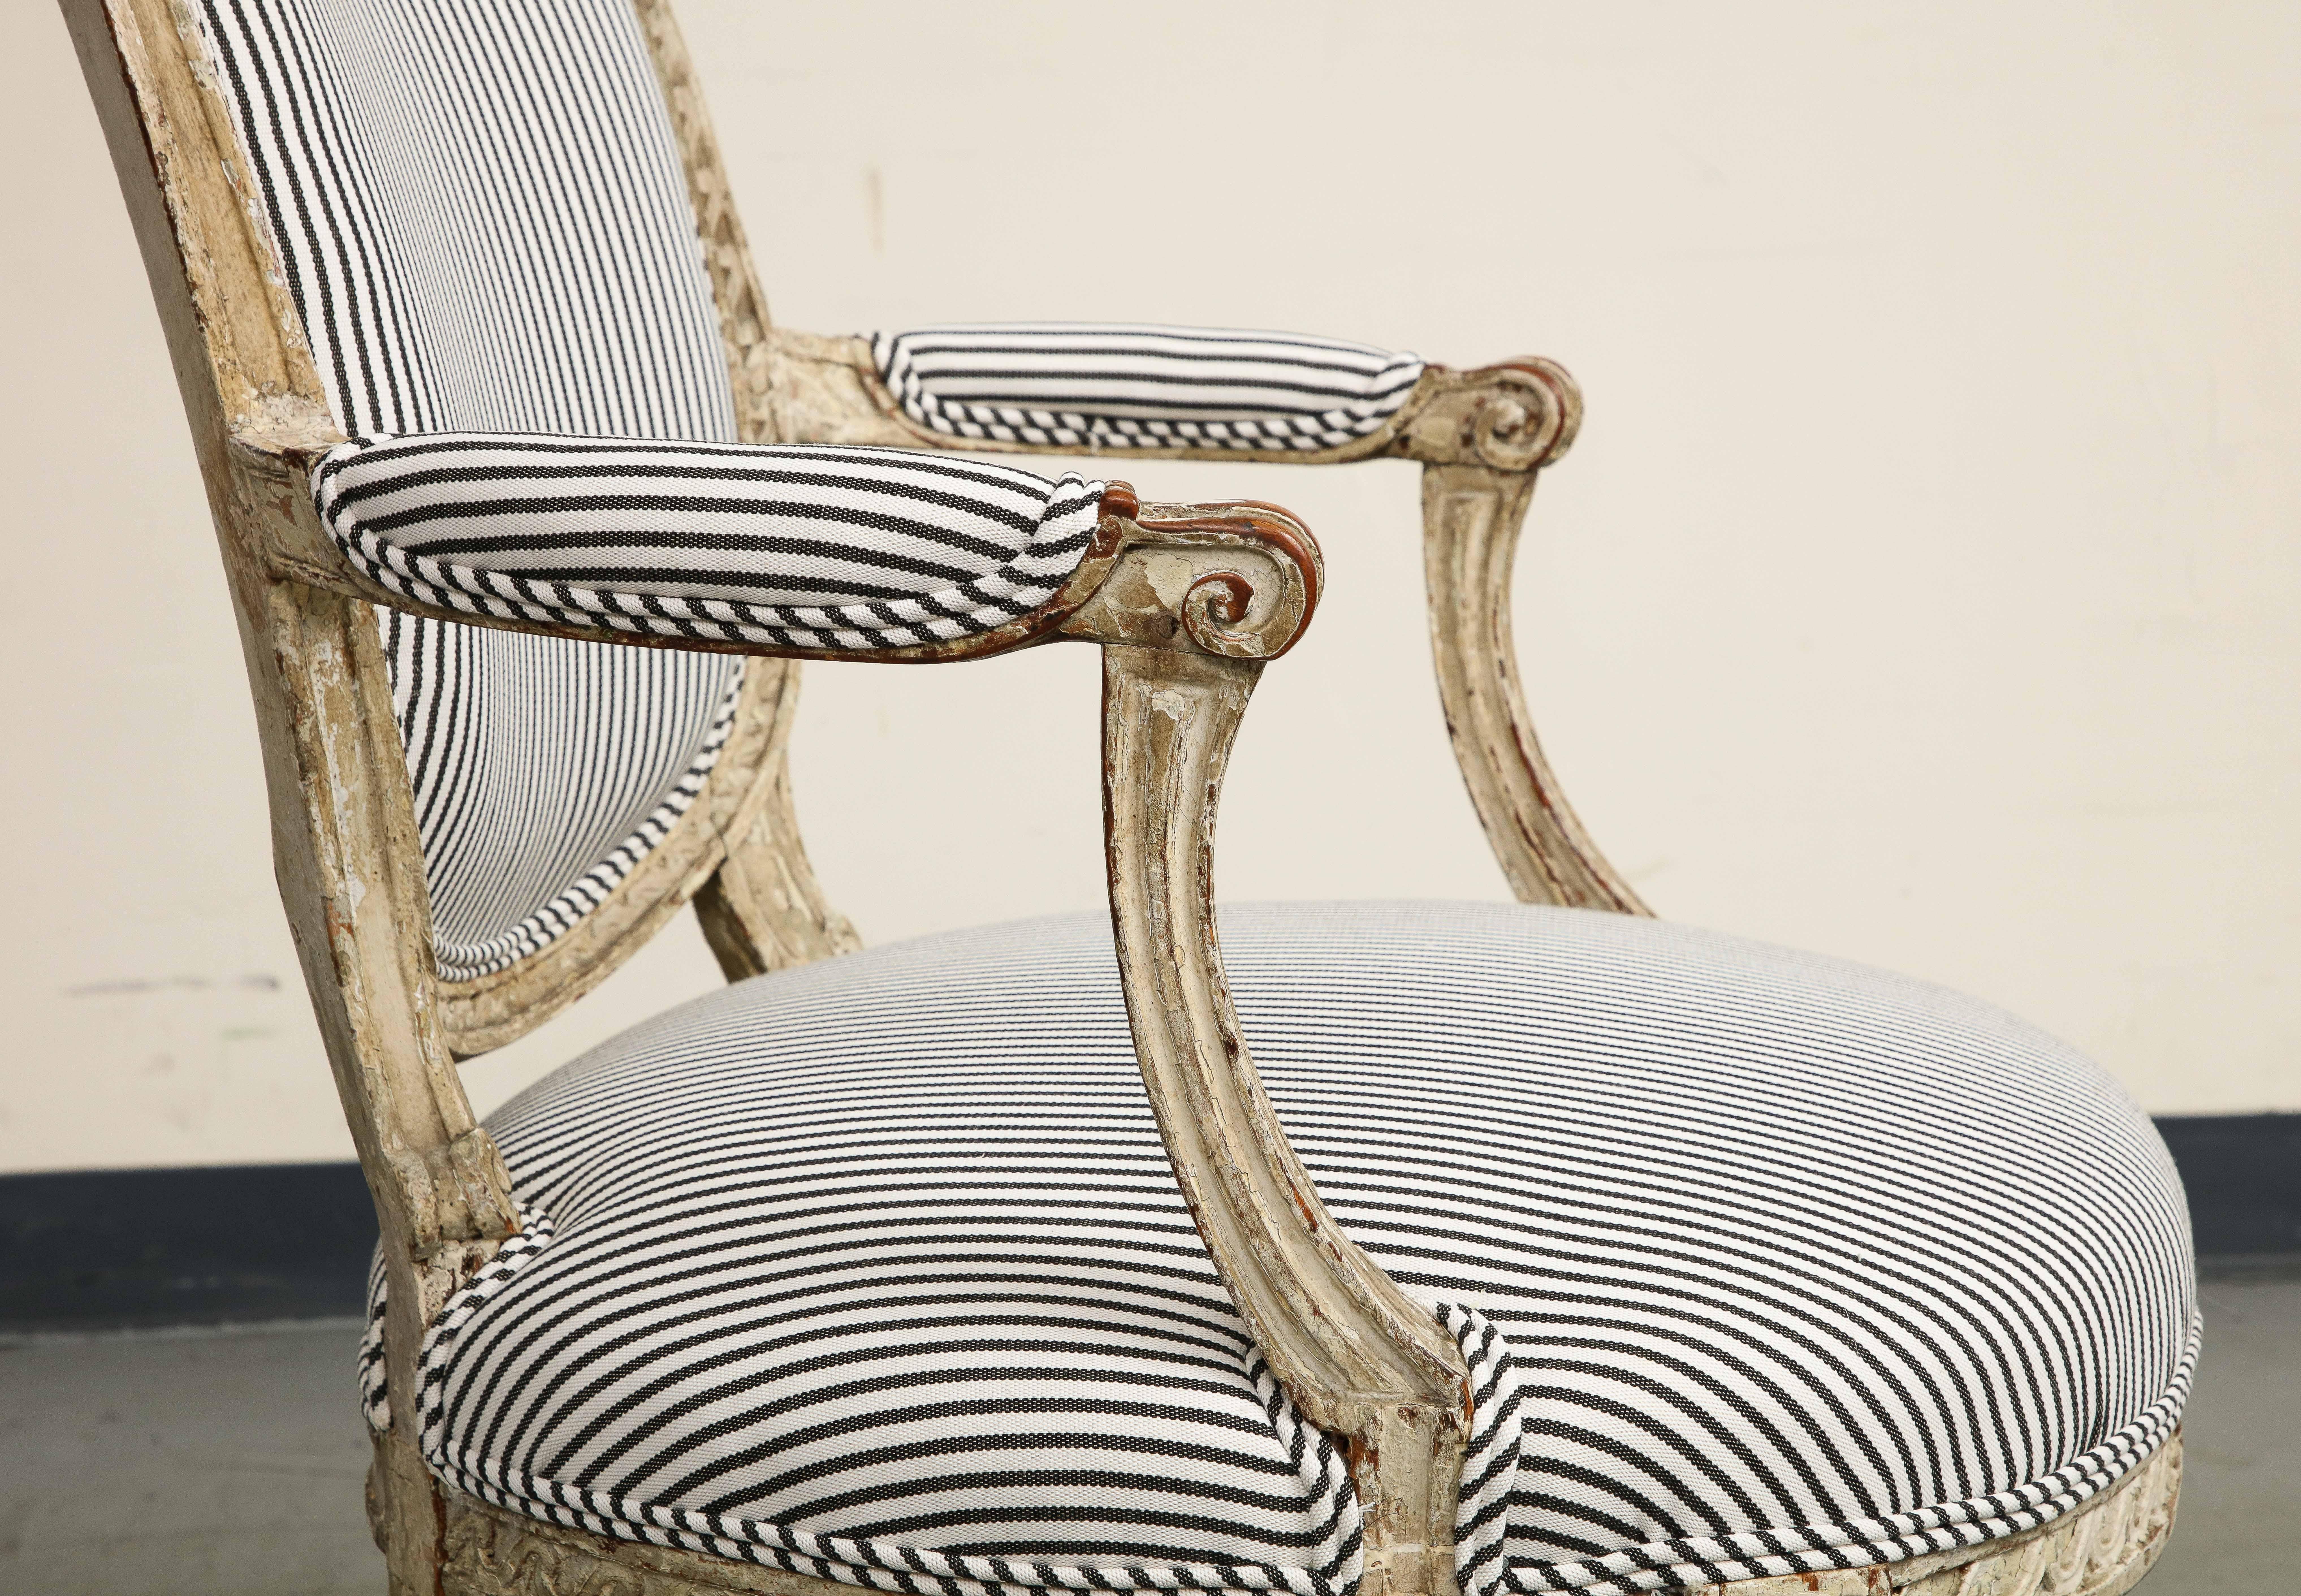 19th Century French Louis XVI Style Fauteuil Chair in Striped Linen Upholstery For Sale 5